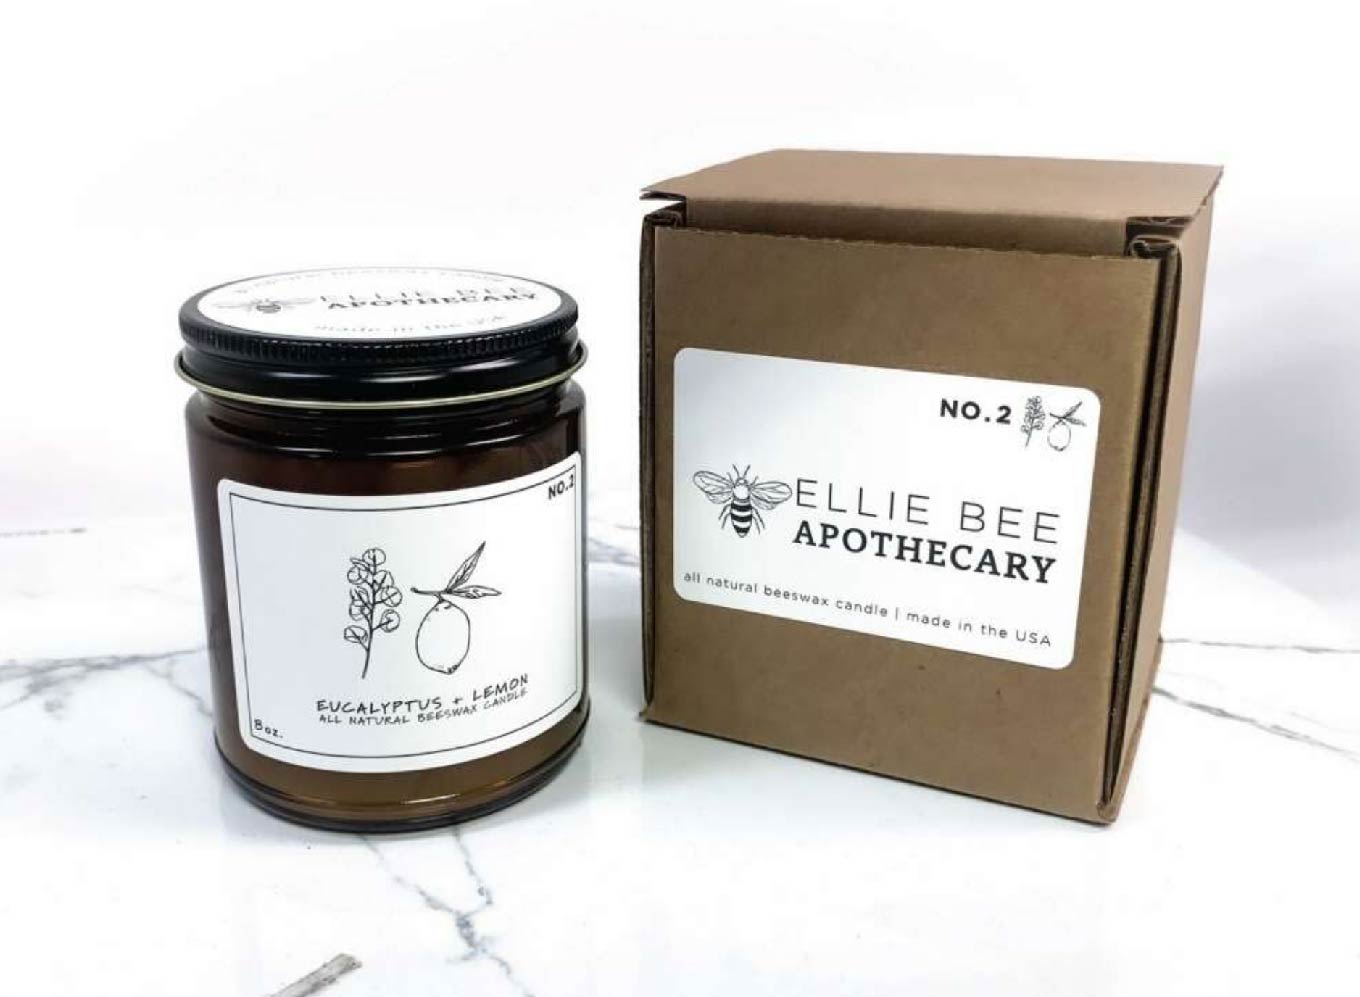 A photo of a eucalyptus and lemon beeswax candle next to its box, showcasing packaging and brand design.